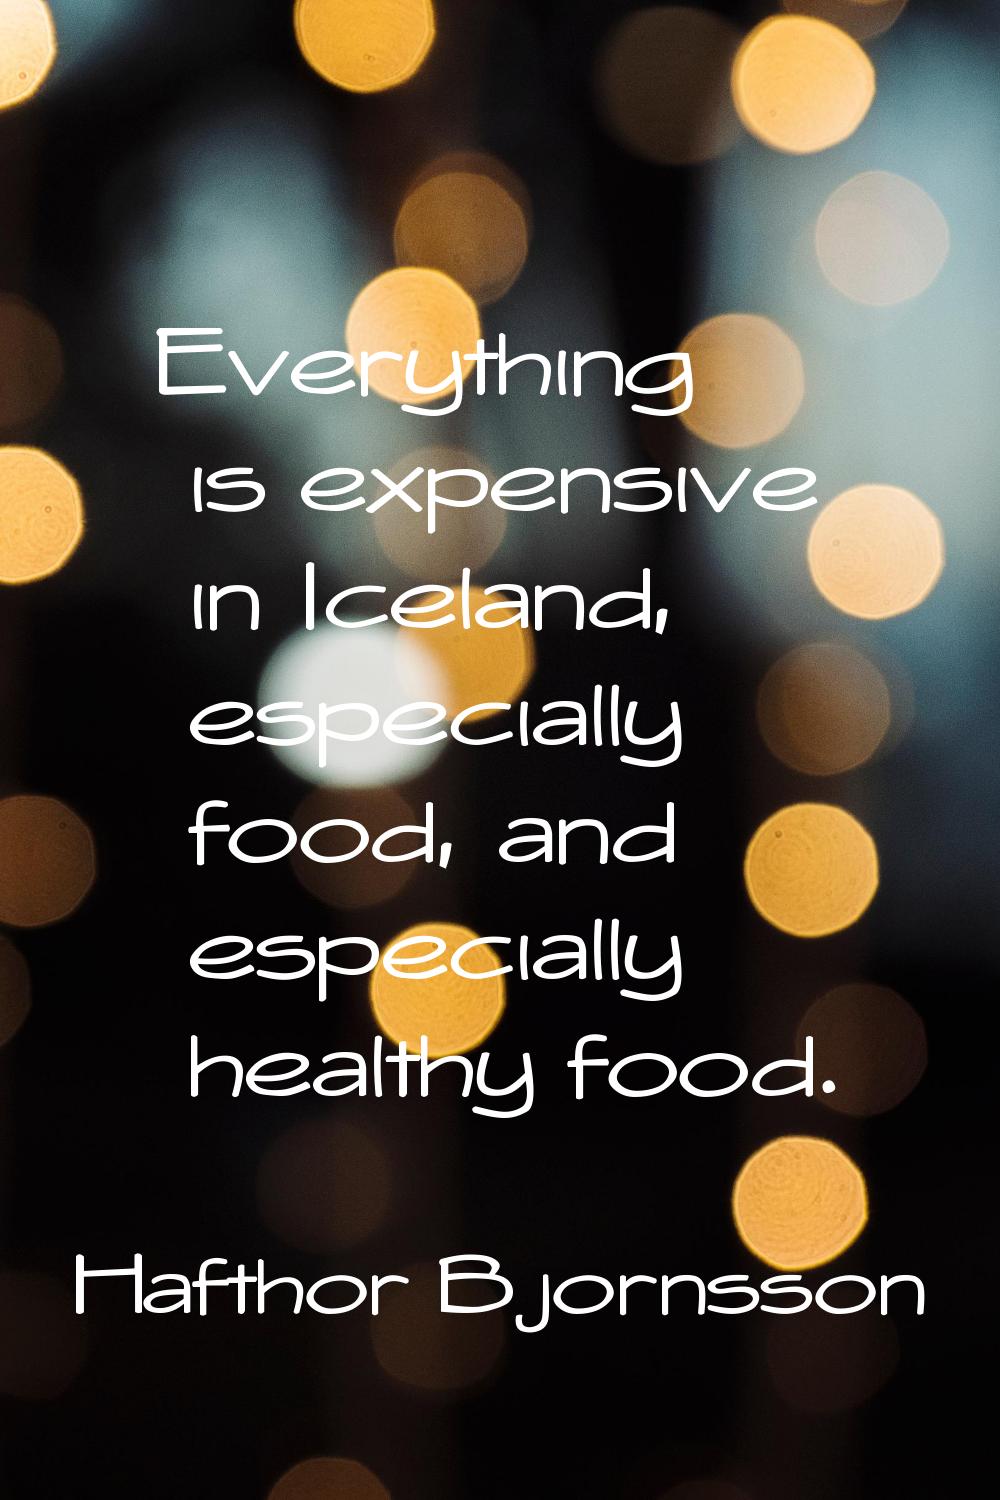 Everything is expensive in Iceland, especially food, and especially healthy food.